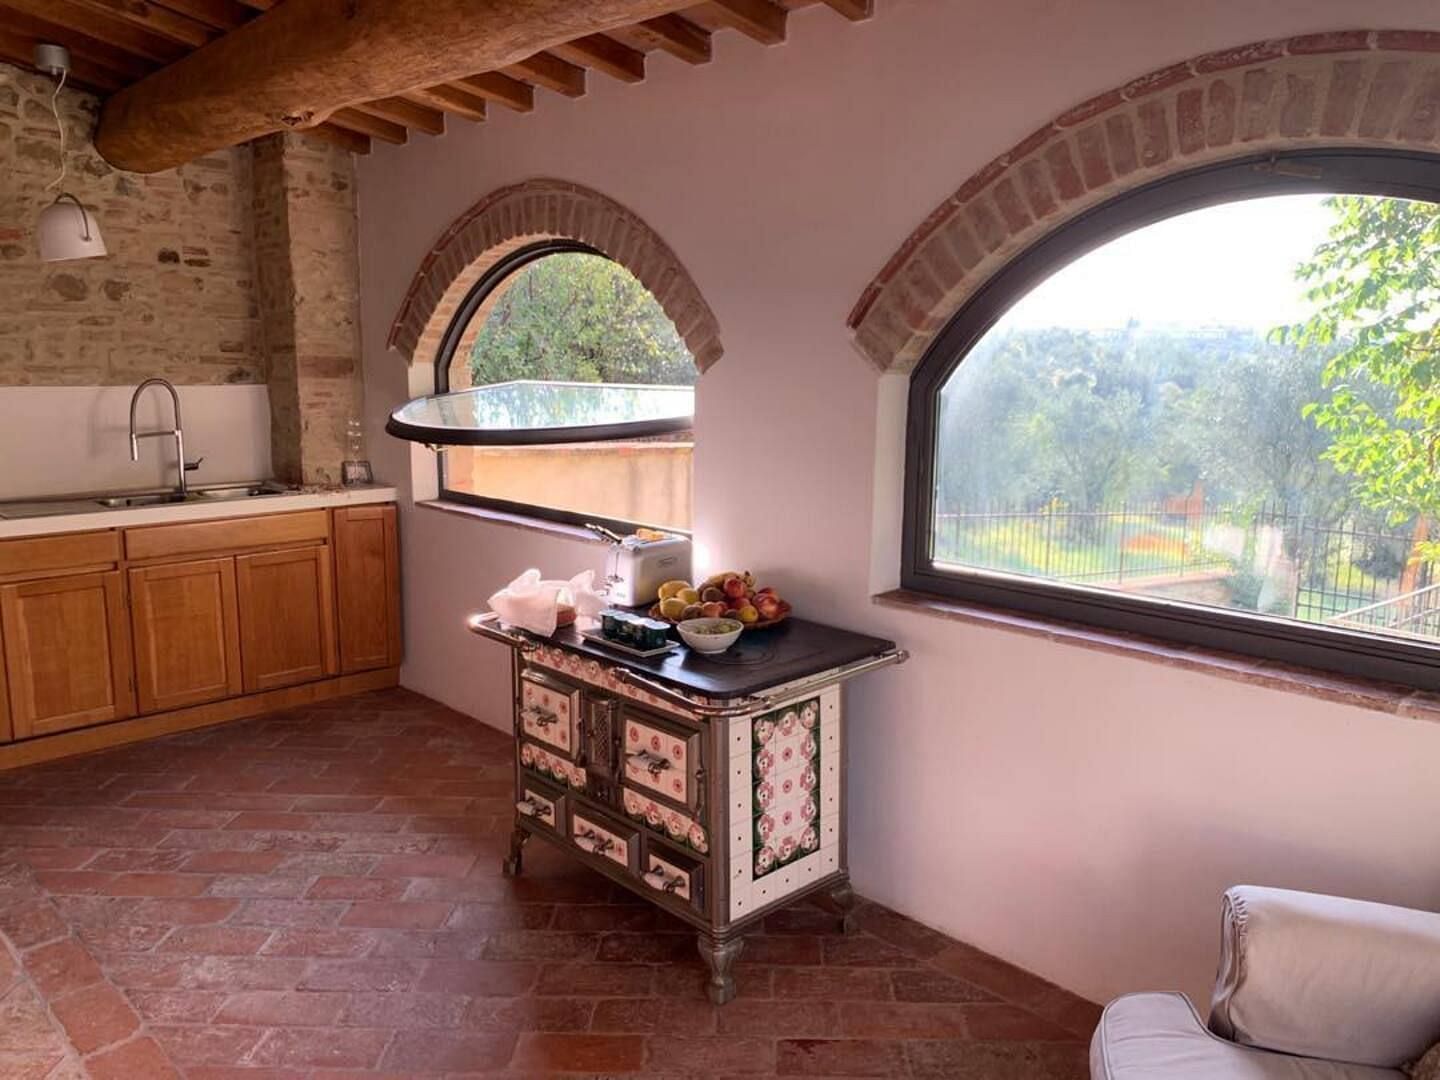 JWguest Bed and Breakfast at Tavarnelle, Toscana | The Barn under the Tuscan countryside | Jwbnb no brobnb 13